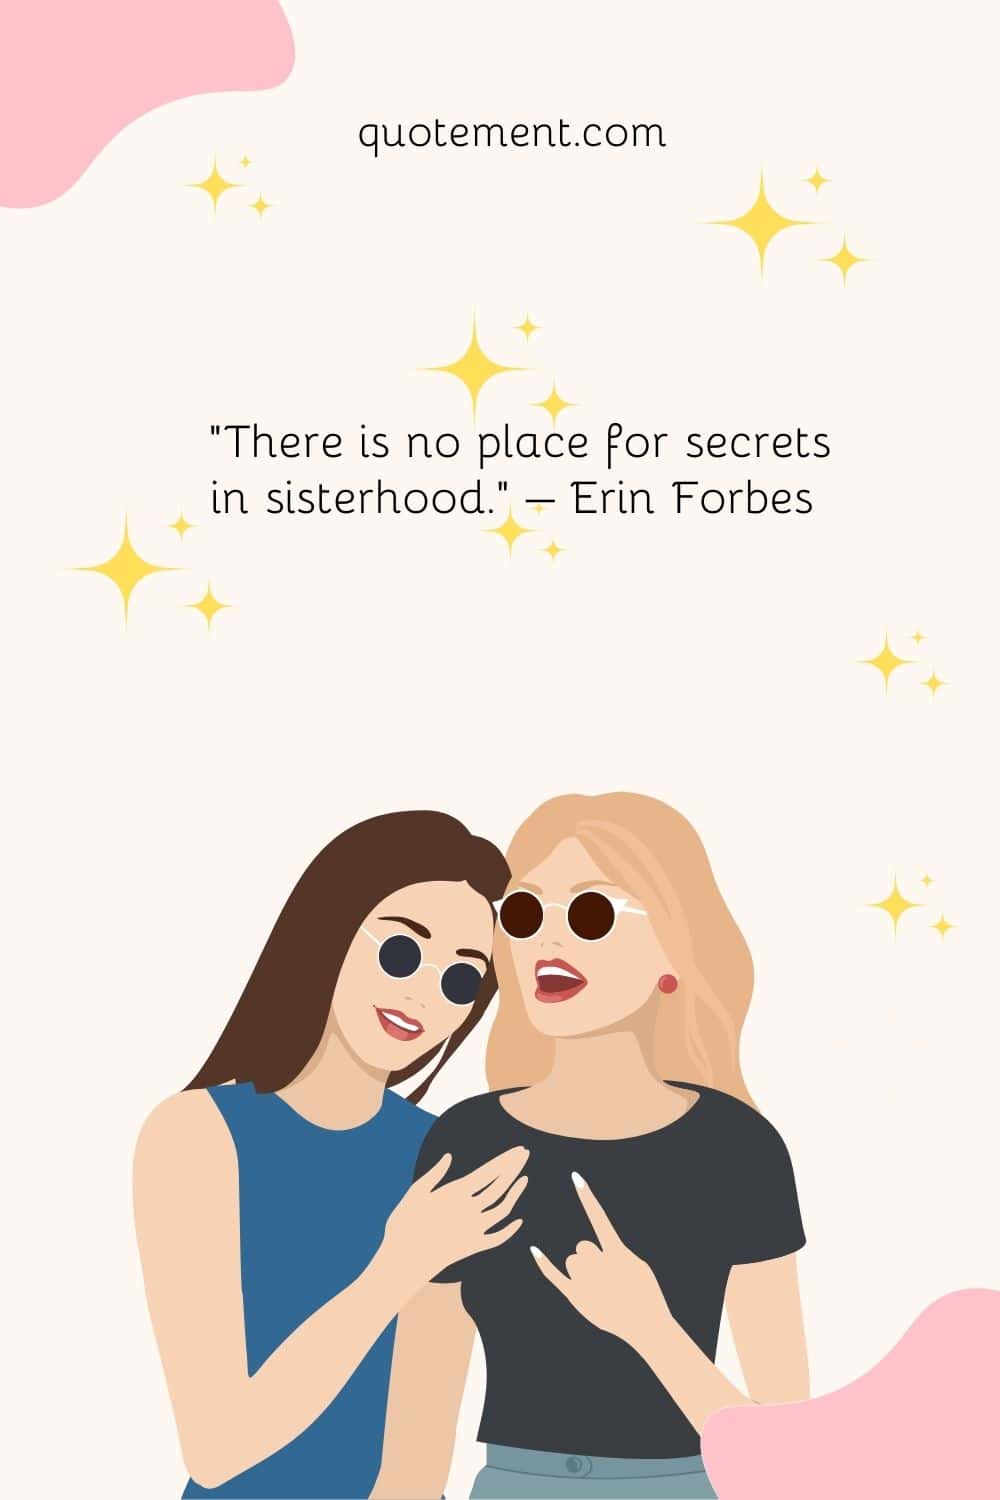 “There is no place for secrets in sisterhood.” – Erin Forbes